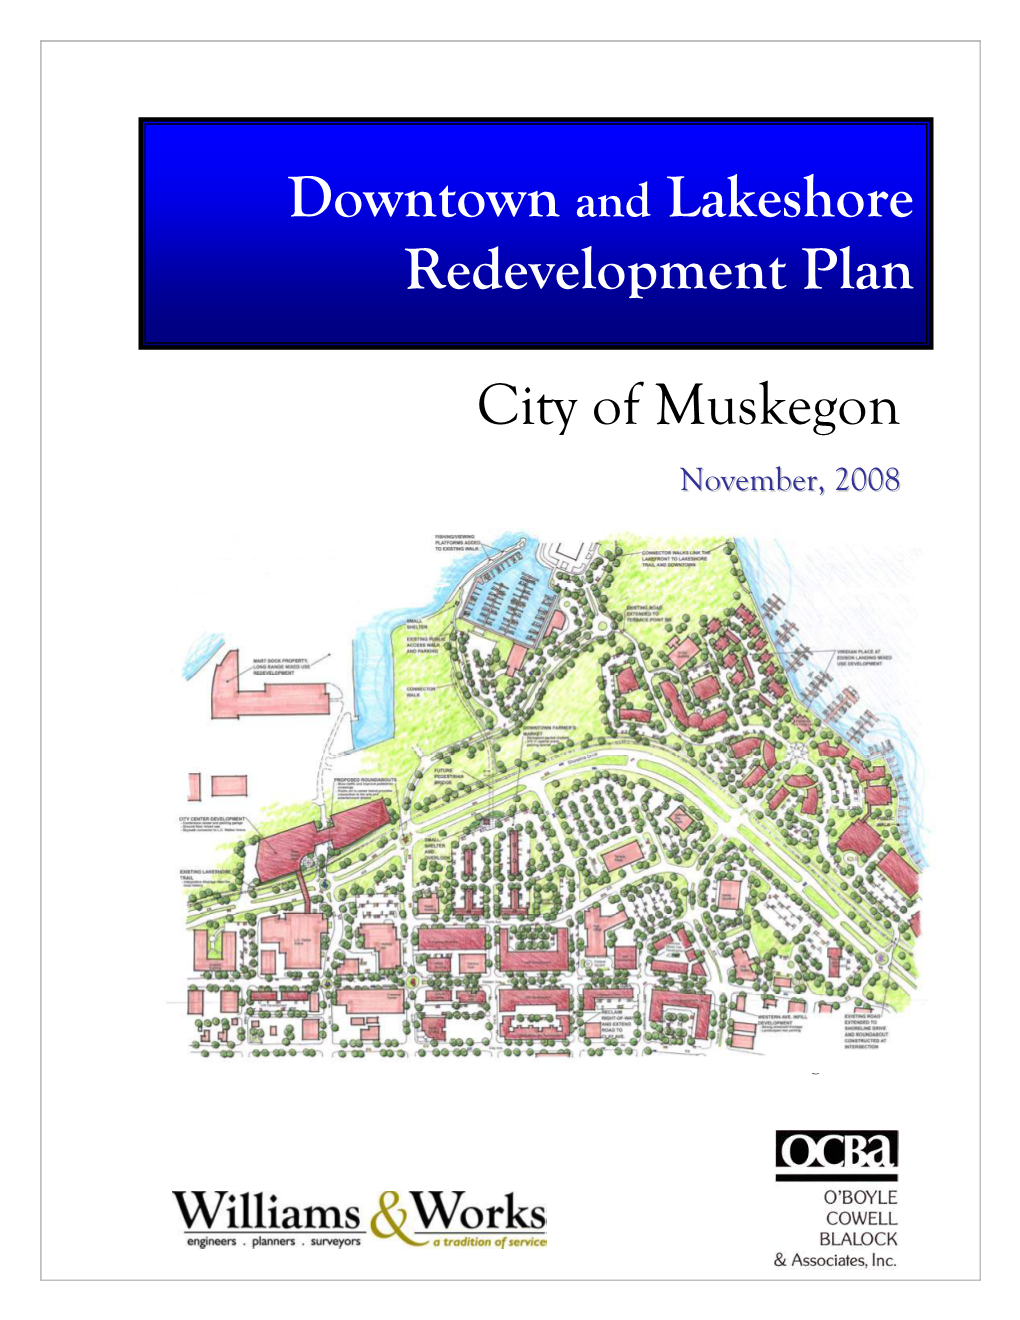 City of Muskegon Downtown and Lakeshore Redevelopment Plan